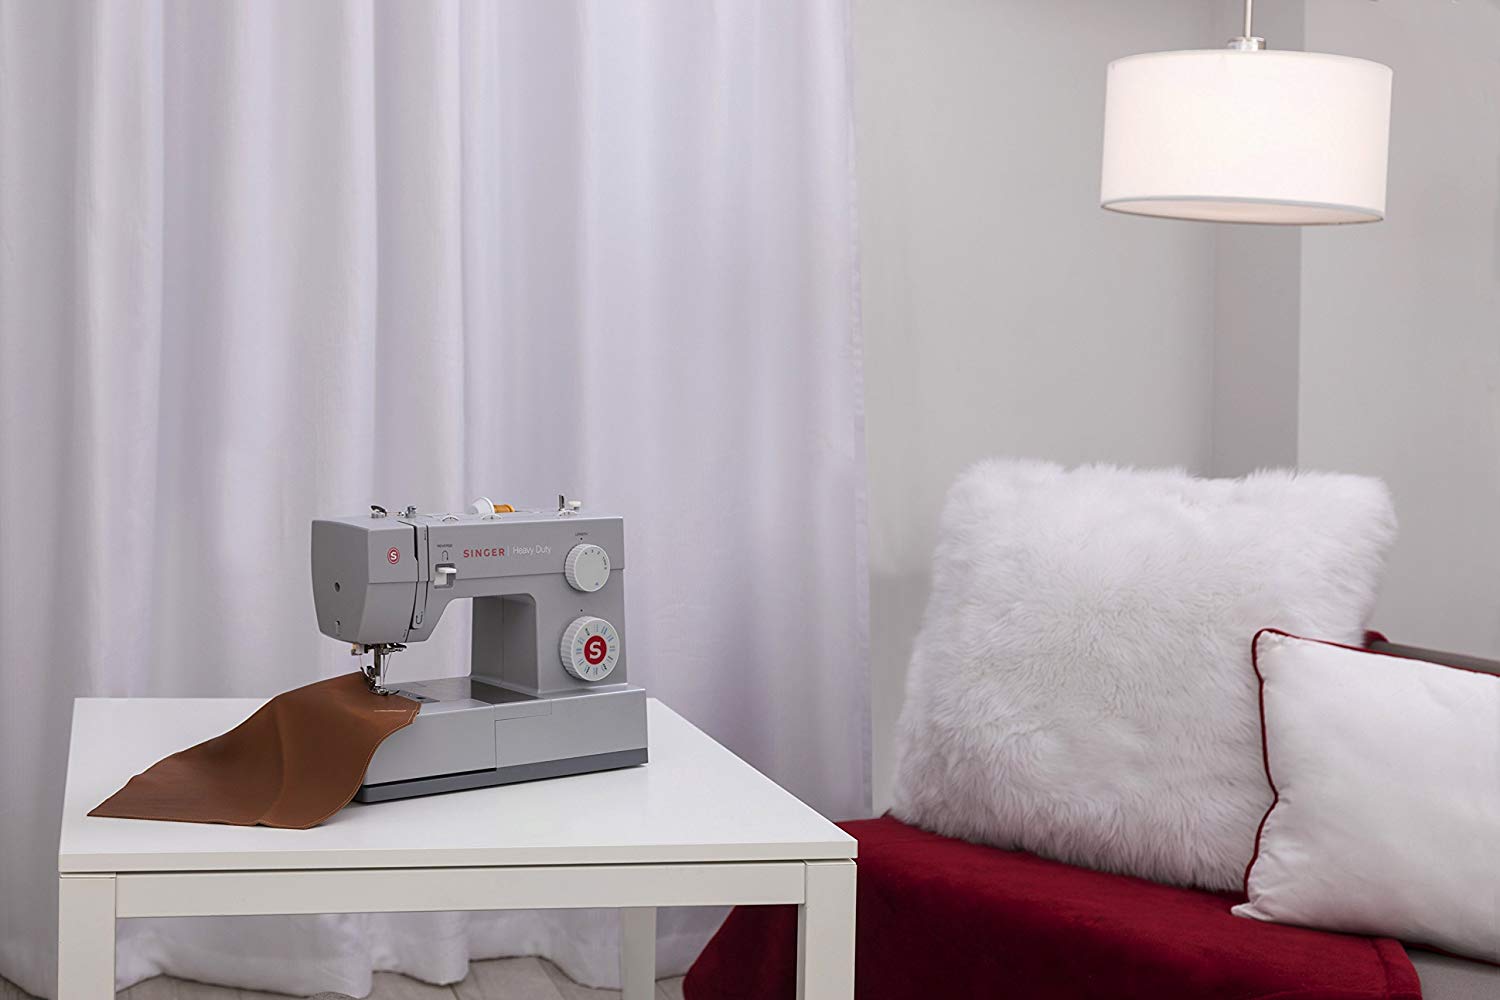 Singer Heavy Duty Sewing Machine - Durable Good Quality